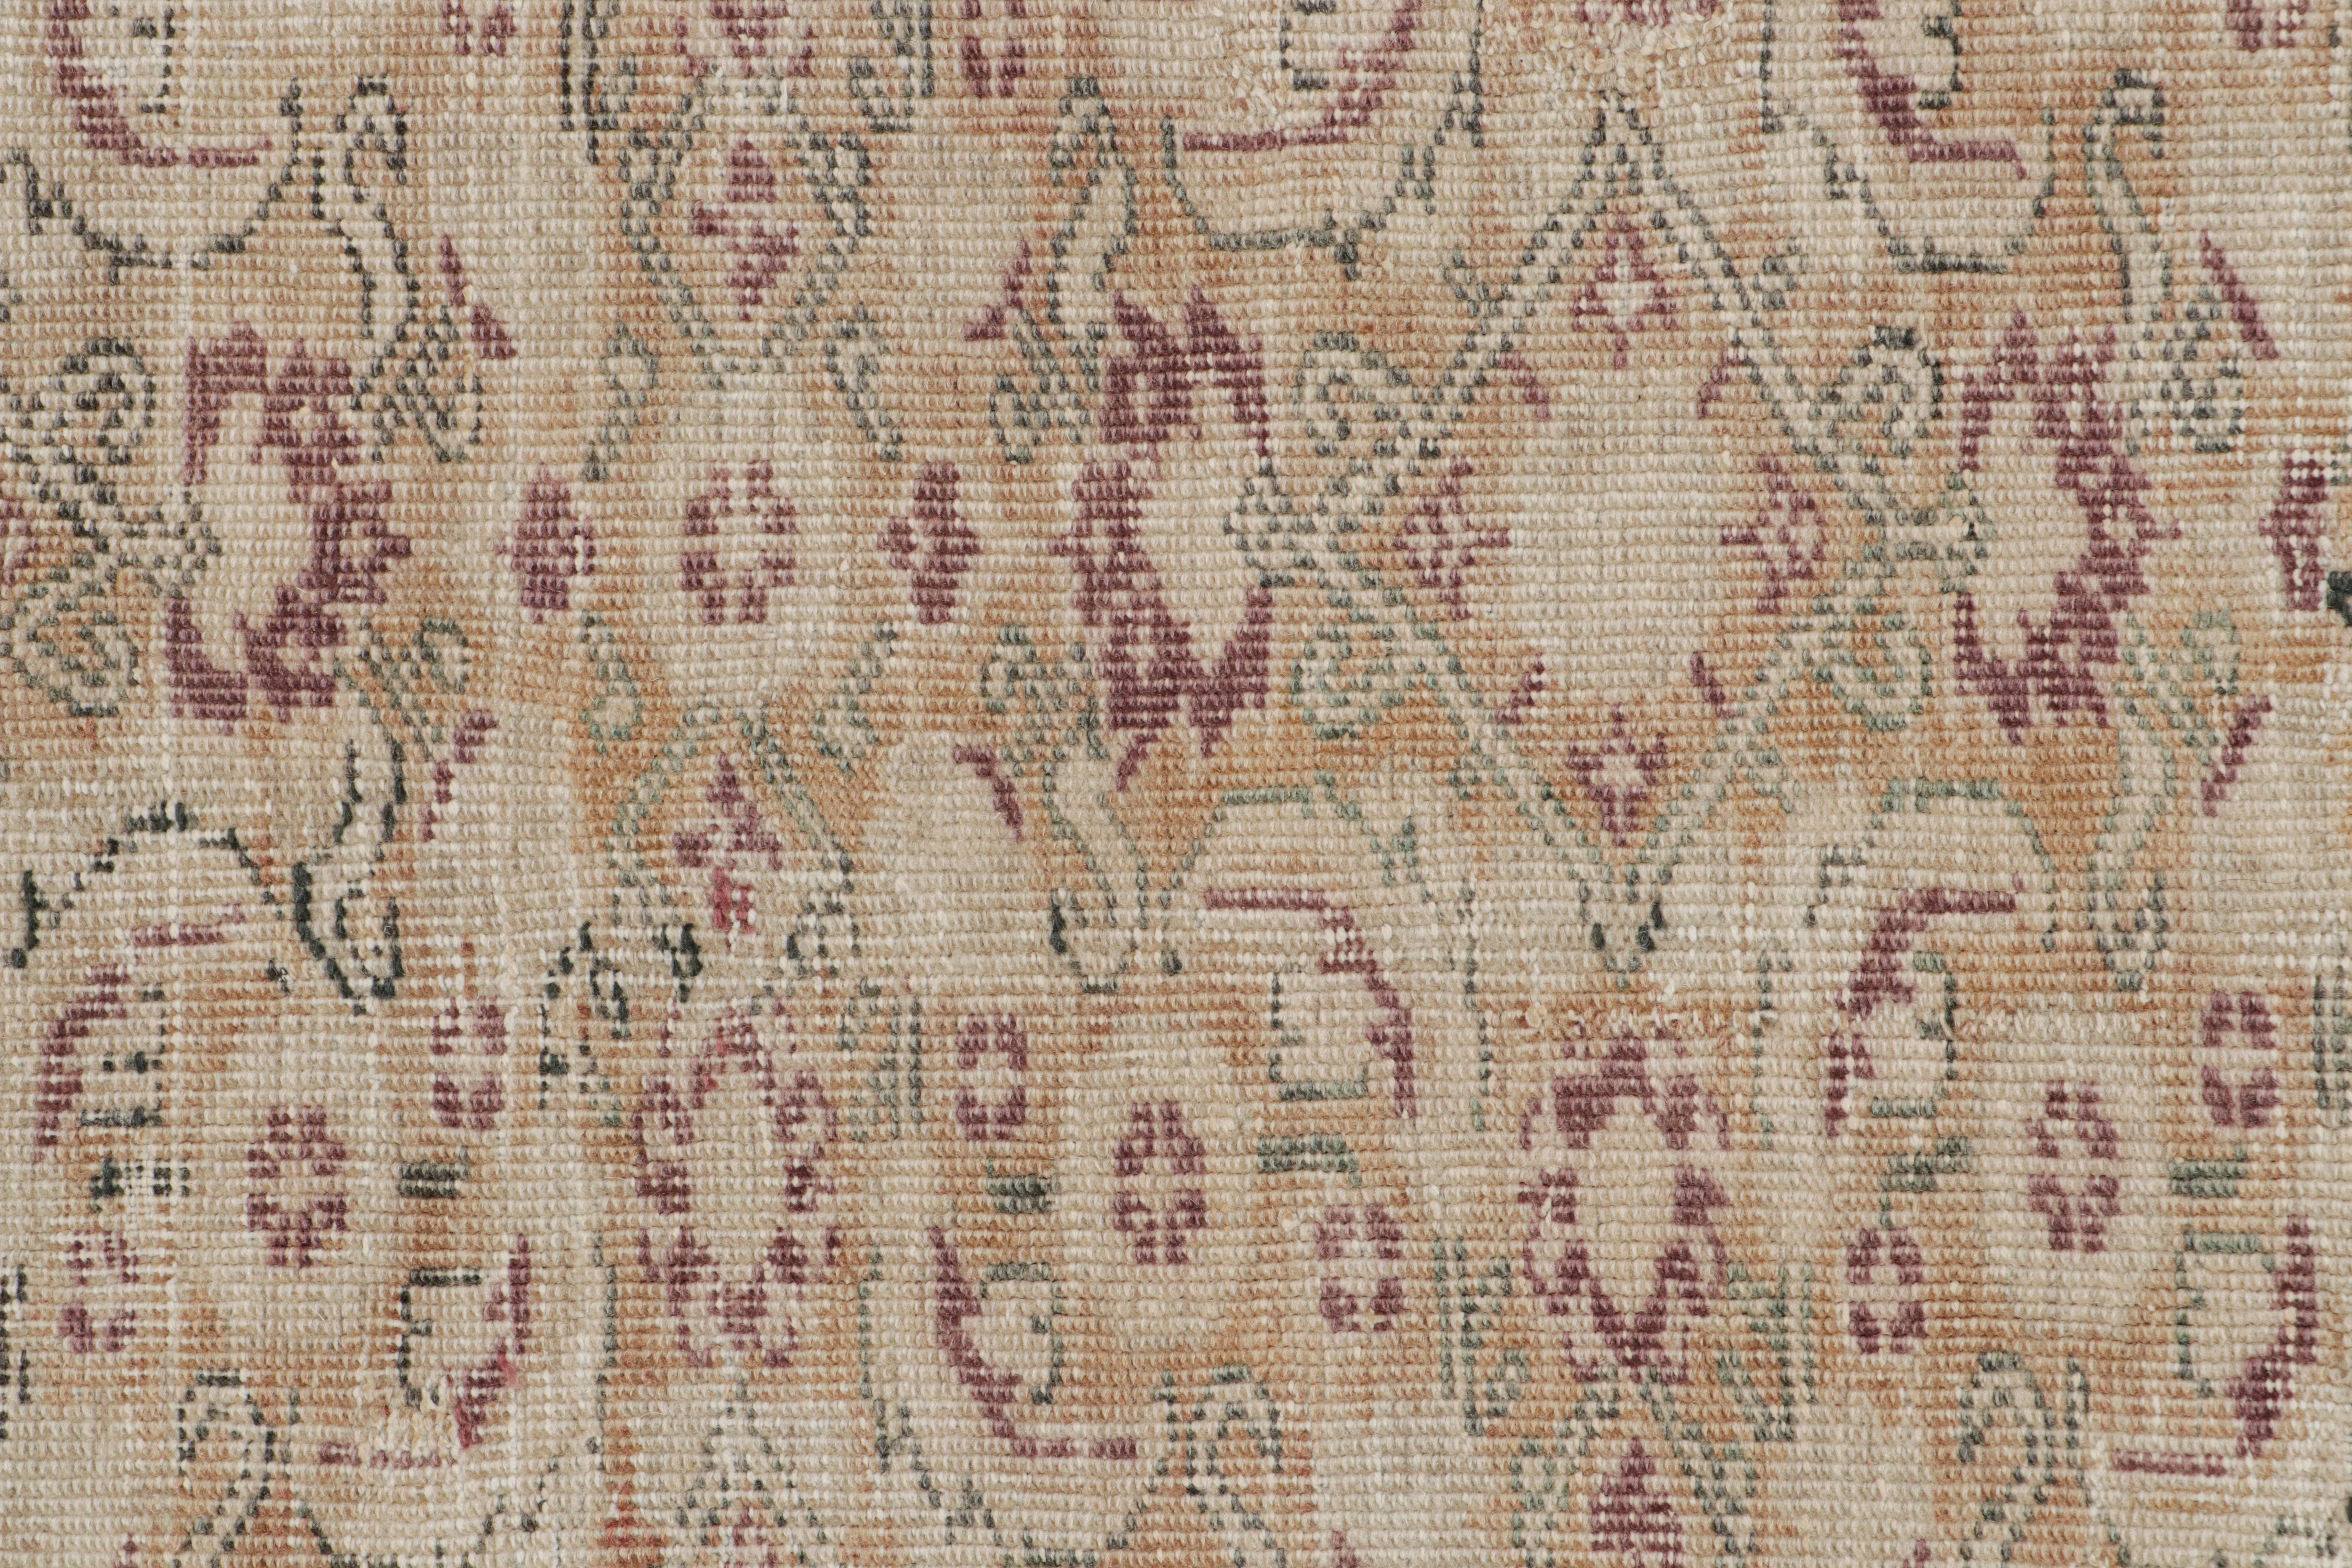 Turkish Vintage Kayseri Rug in Gold and Beige with Floral Patterns, from Rug & Kilim For Sale